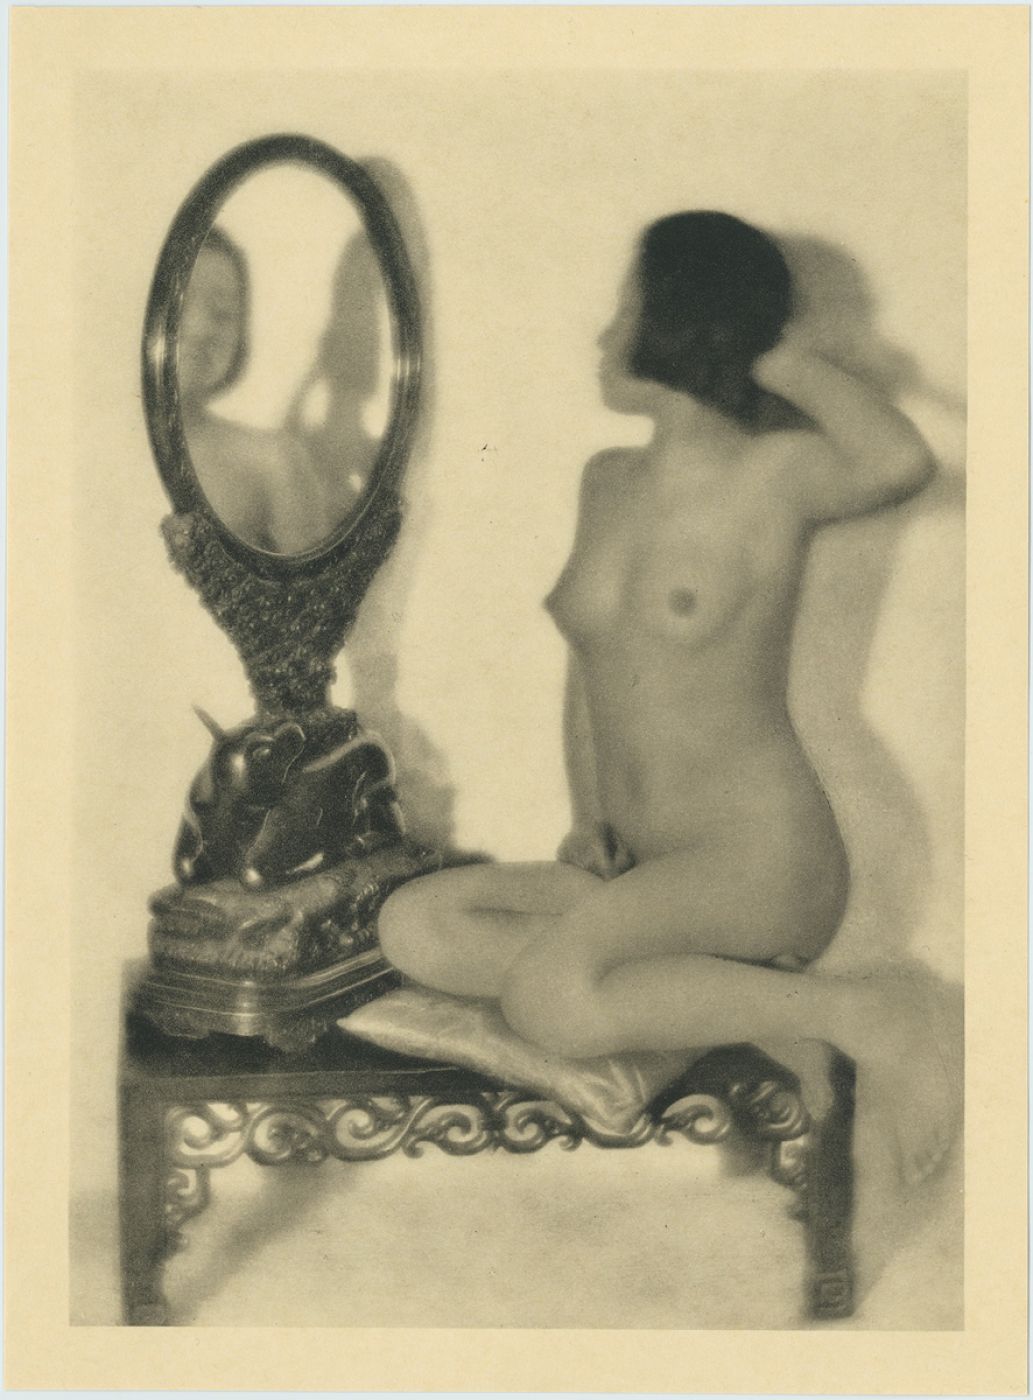 Heinz von Perckhammer, “The culture of the Nude in China”, 1920 ca.